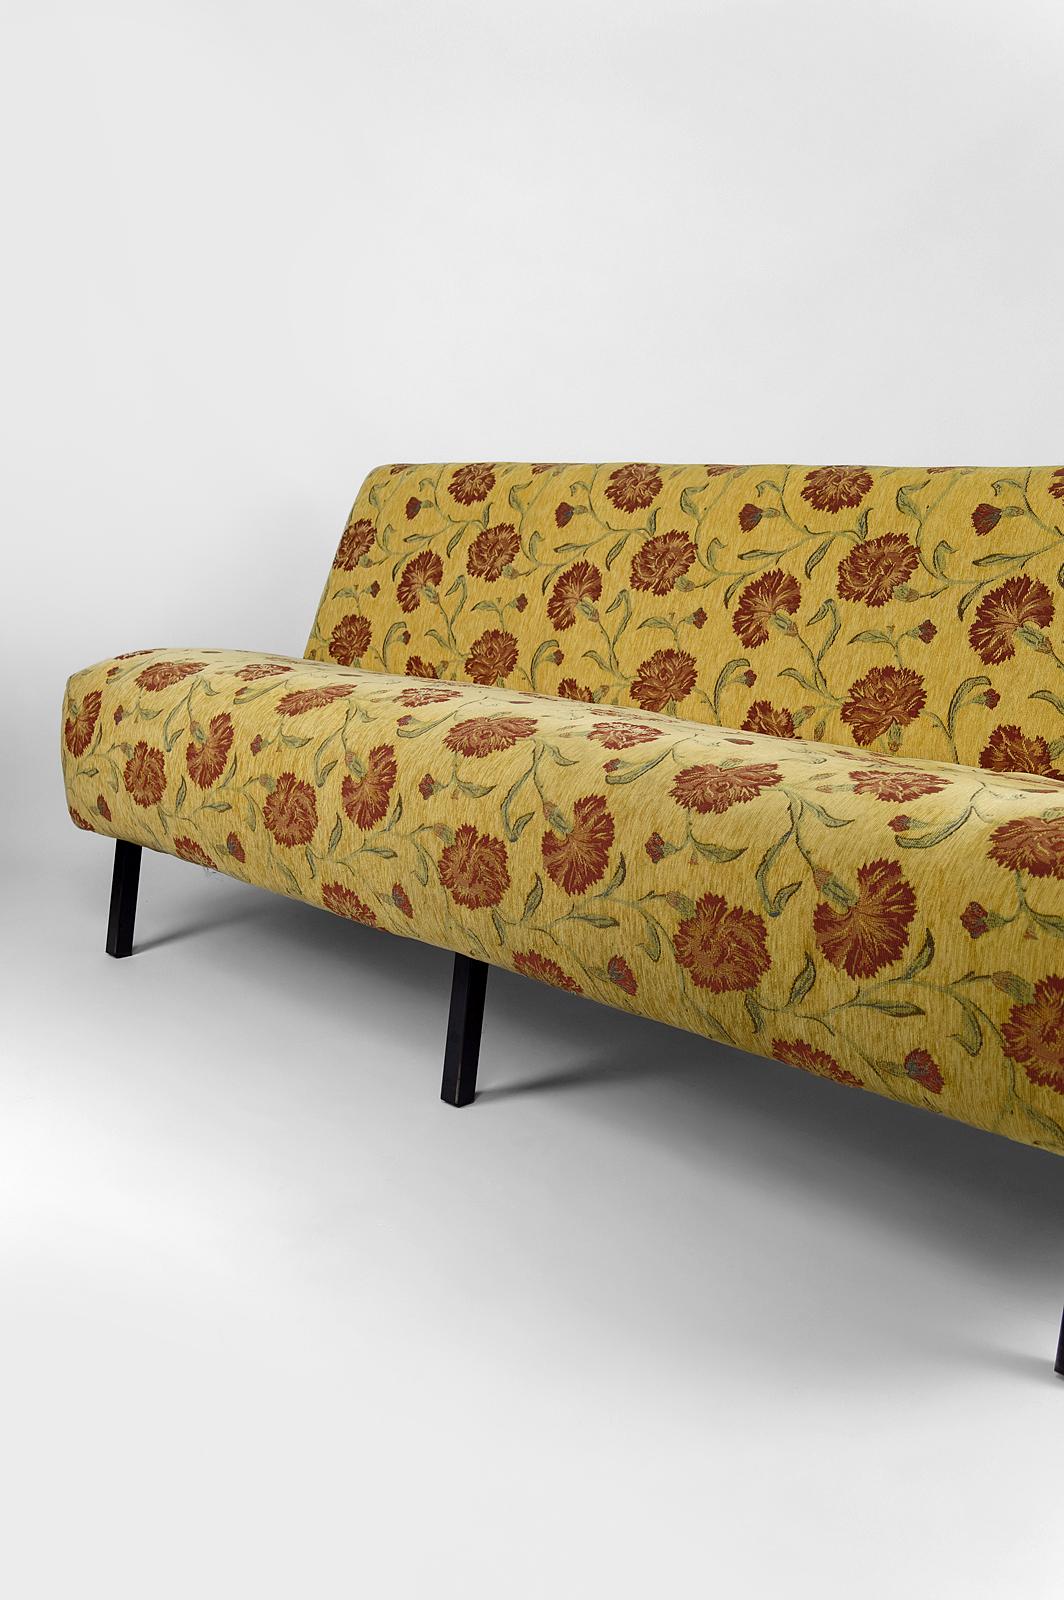 Vintage Boho sofa with yellow and red floral fabric, France, Circa 1960 For Sale 1